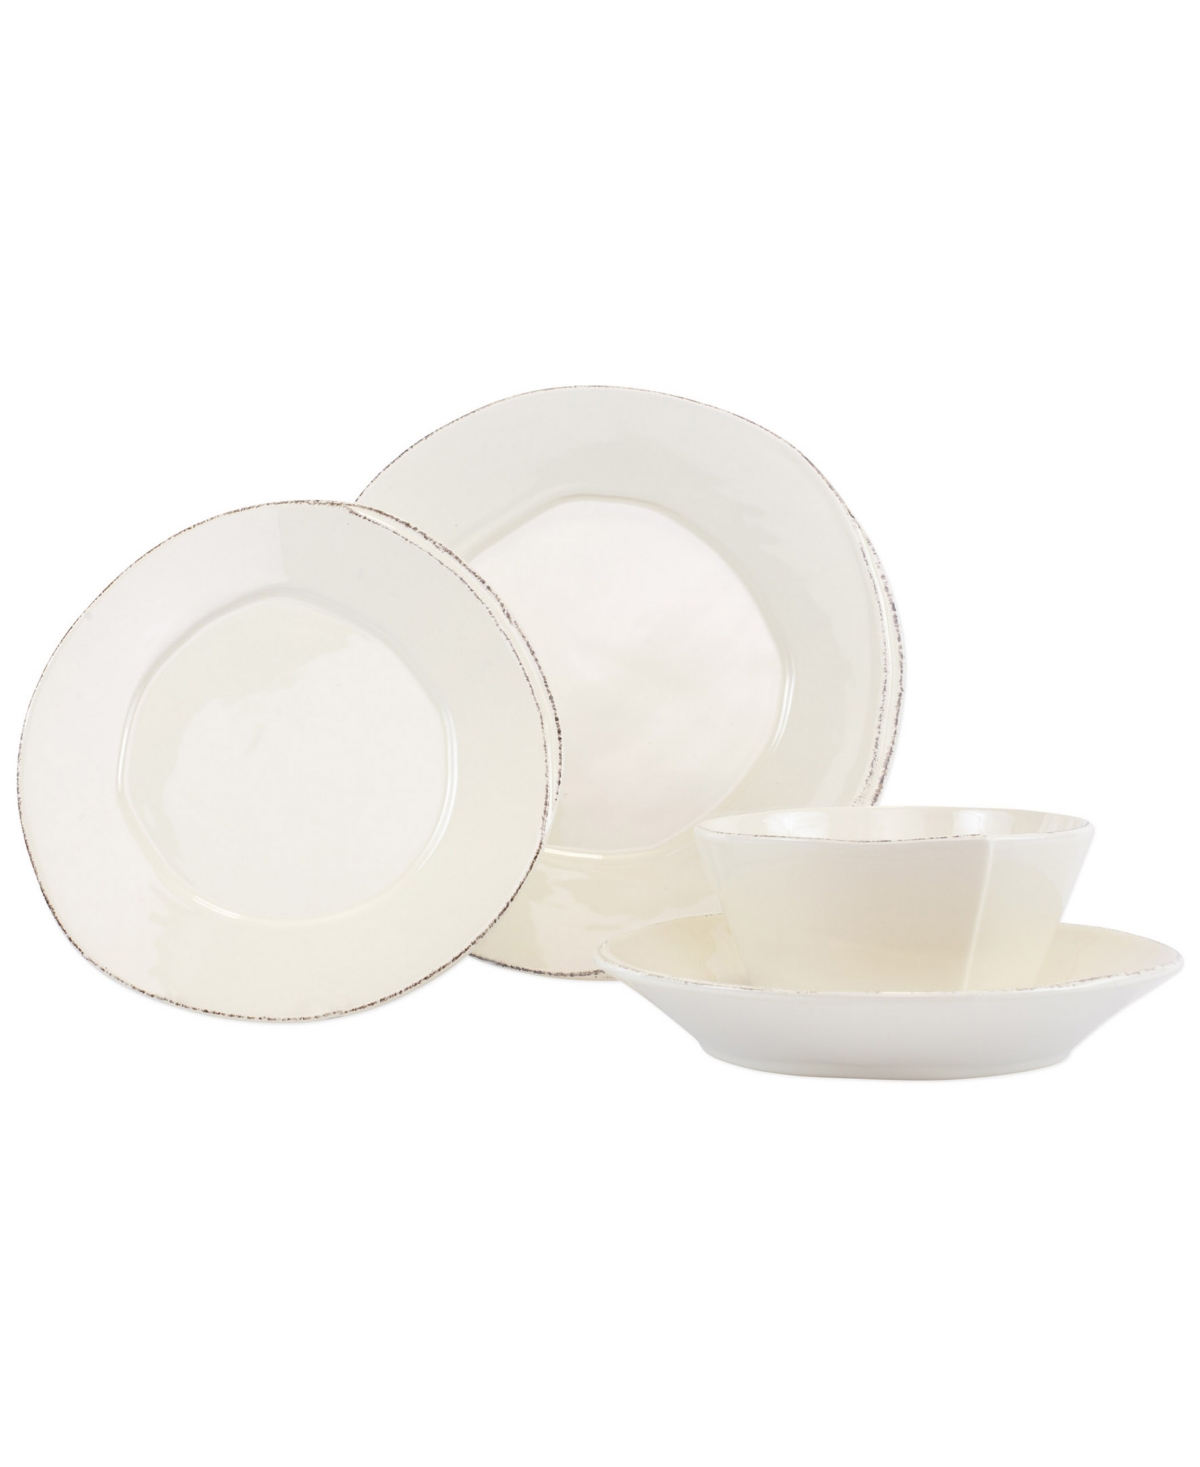 Lastra 4 Piece Place Setting - Linen